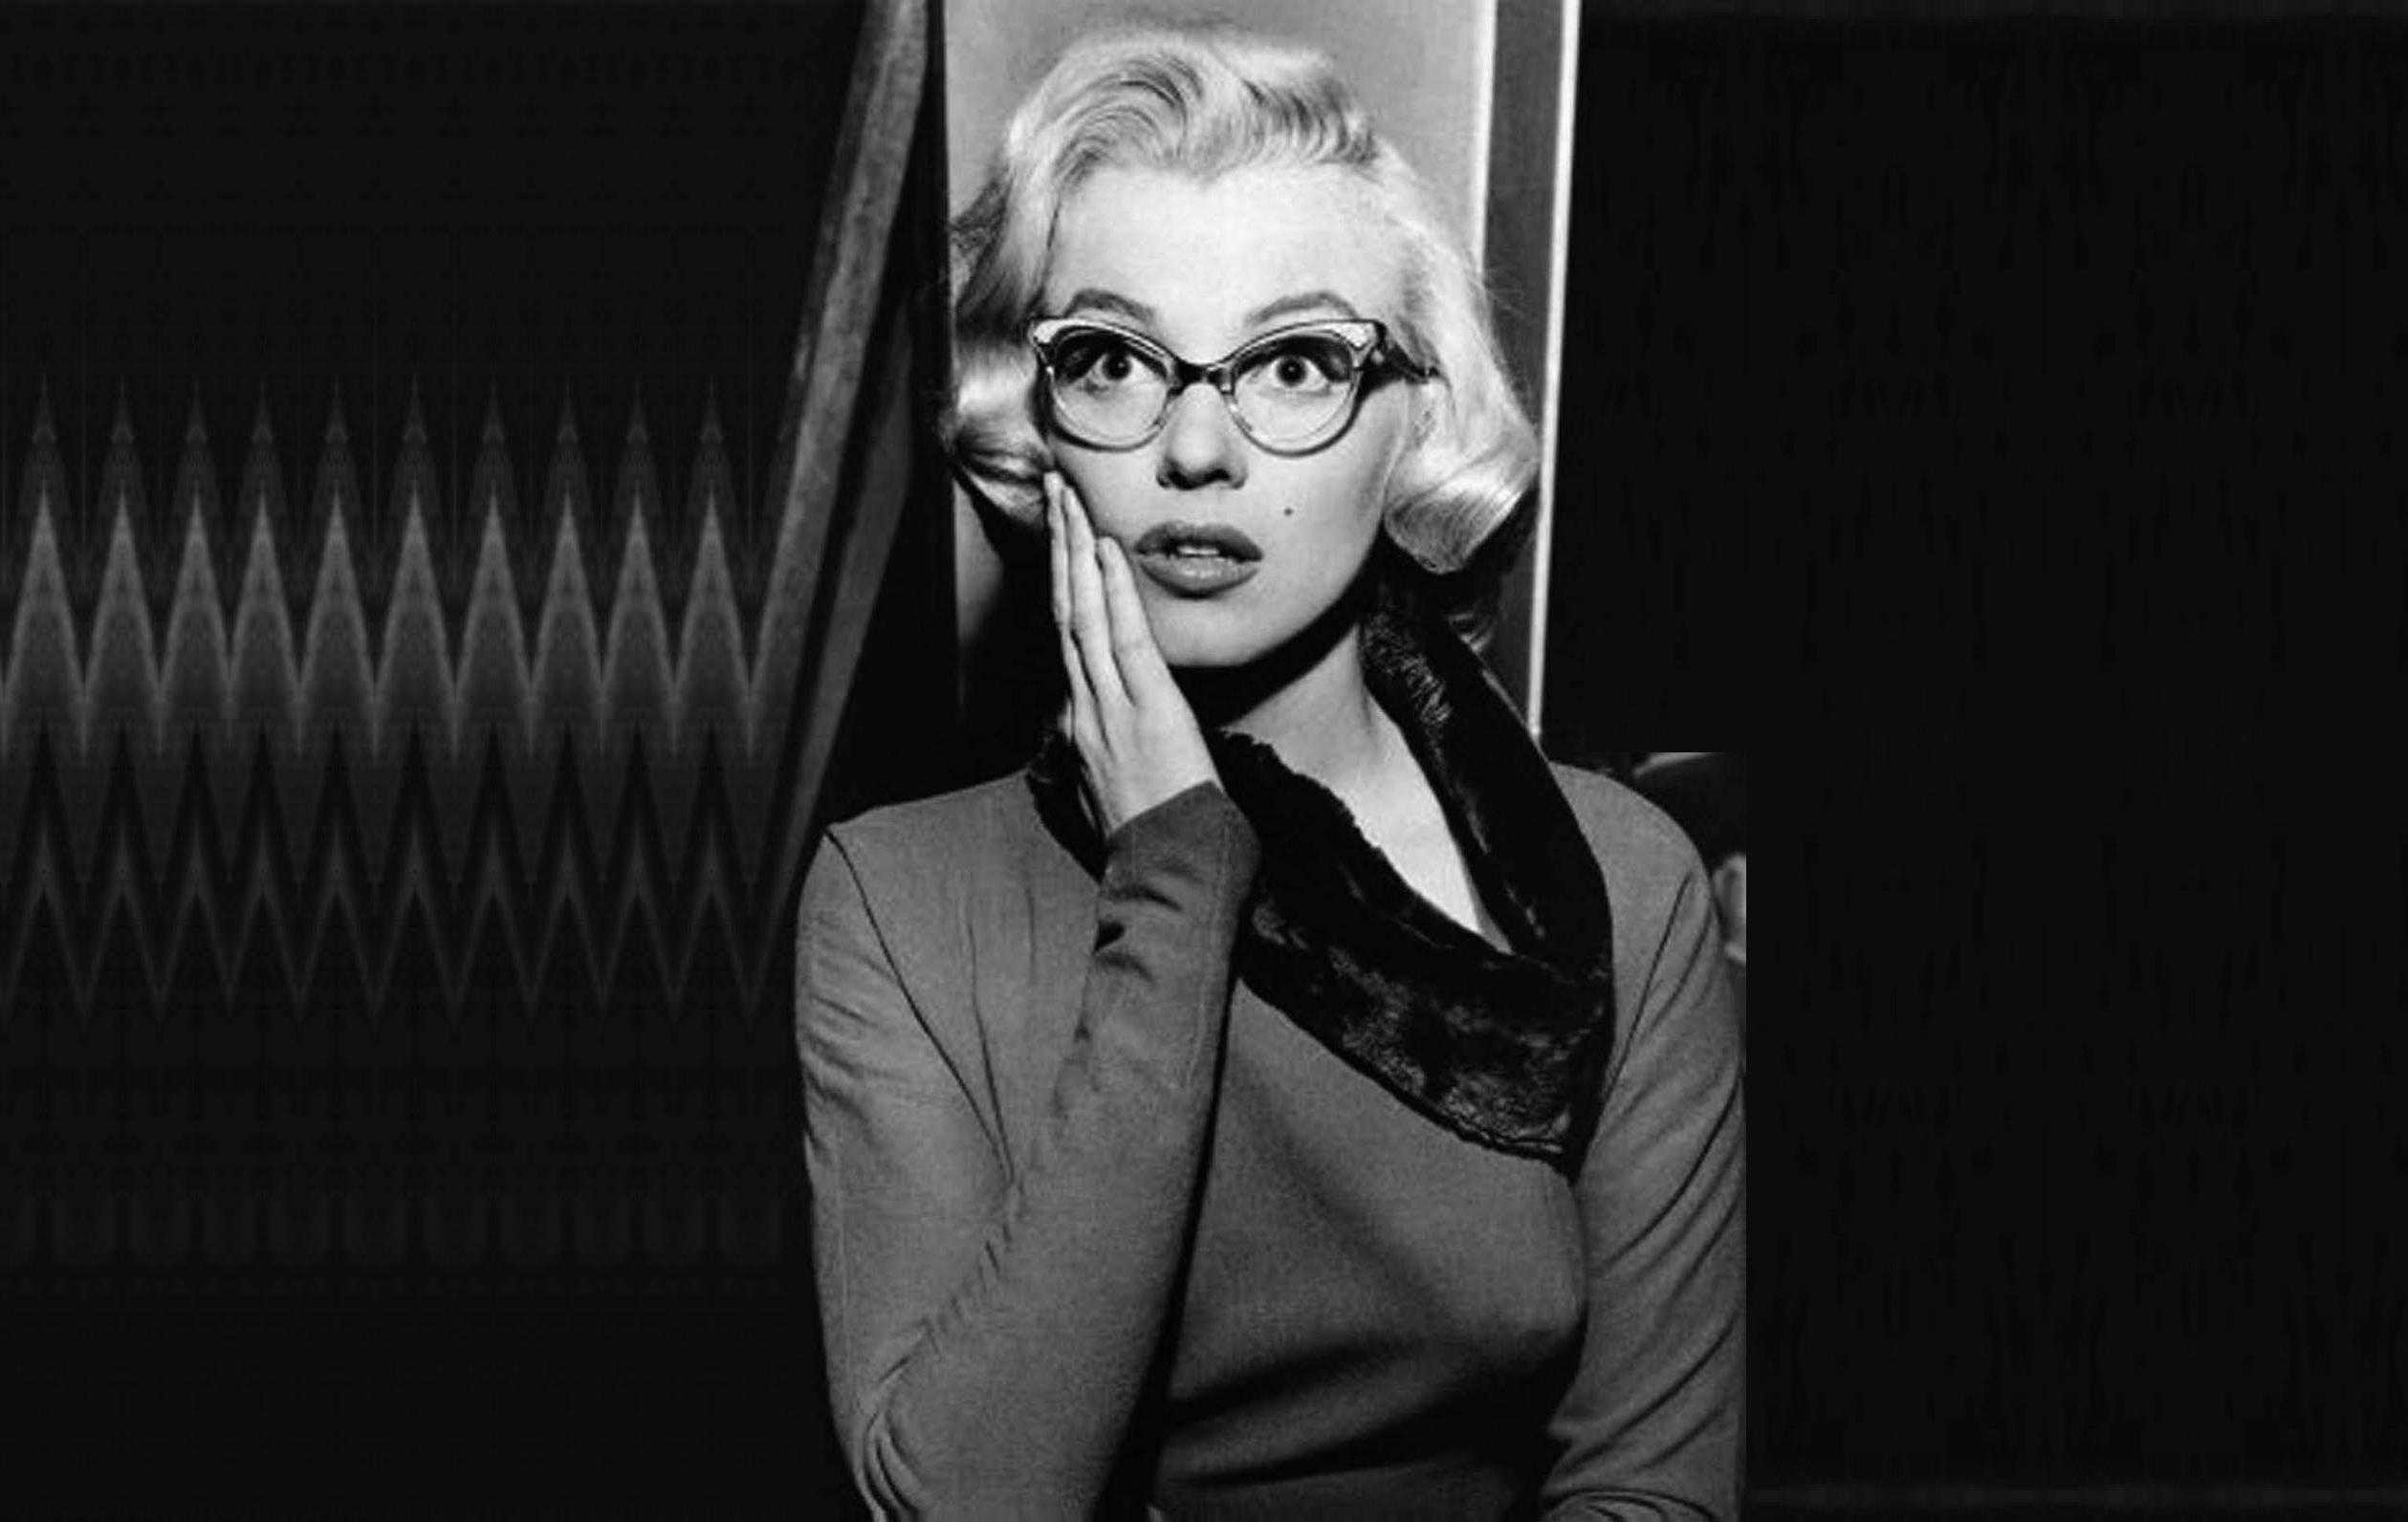 2518x1592, Images Hot Marilyn Monroe Wallpaper Hd For - Desktop Marilyn Monroe Wallpaper Hd - HD Wallpaper 